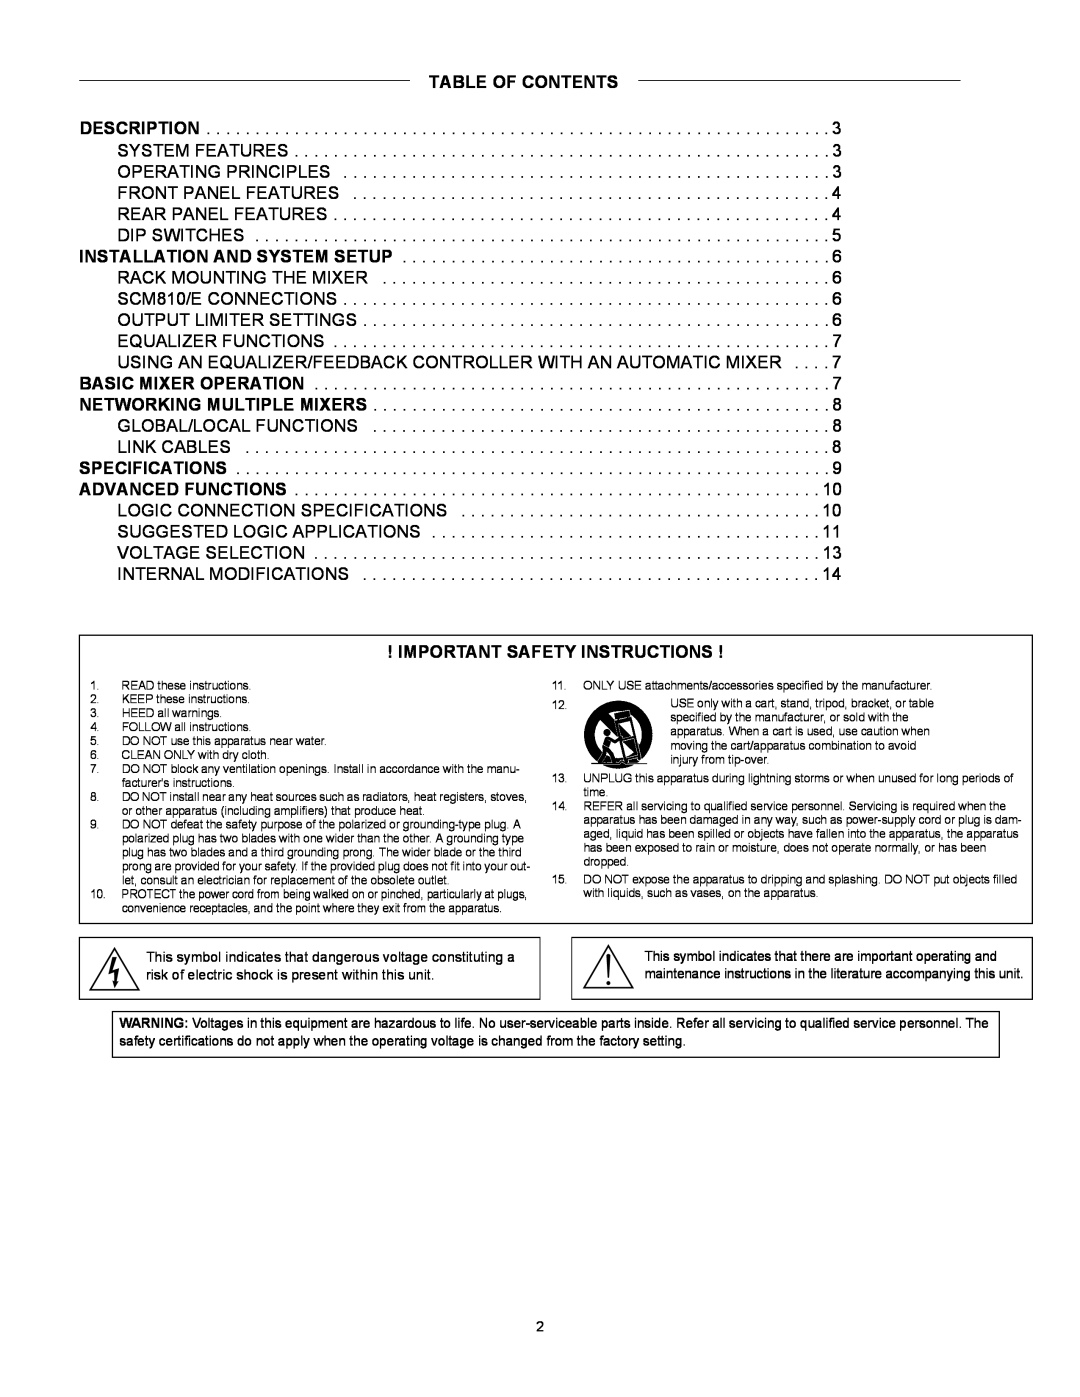 Shure SCM810 manual Table Of Contents, Important Safety Instructions 